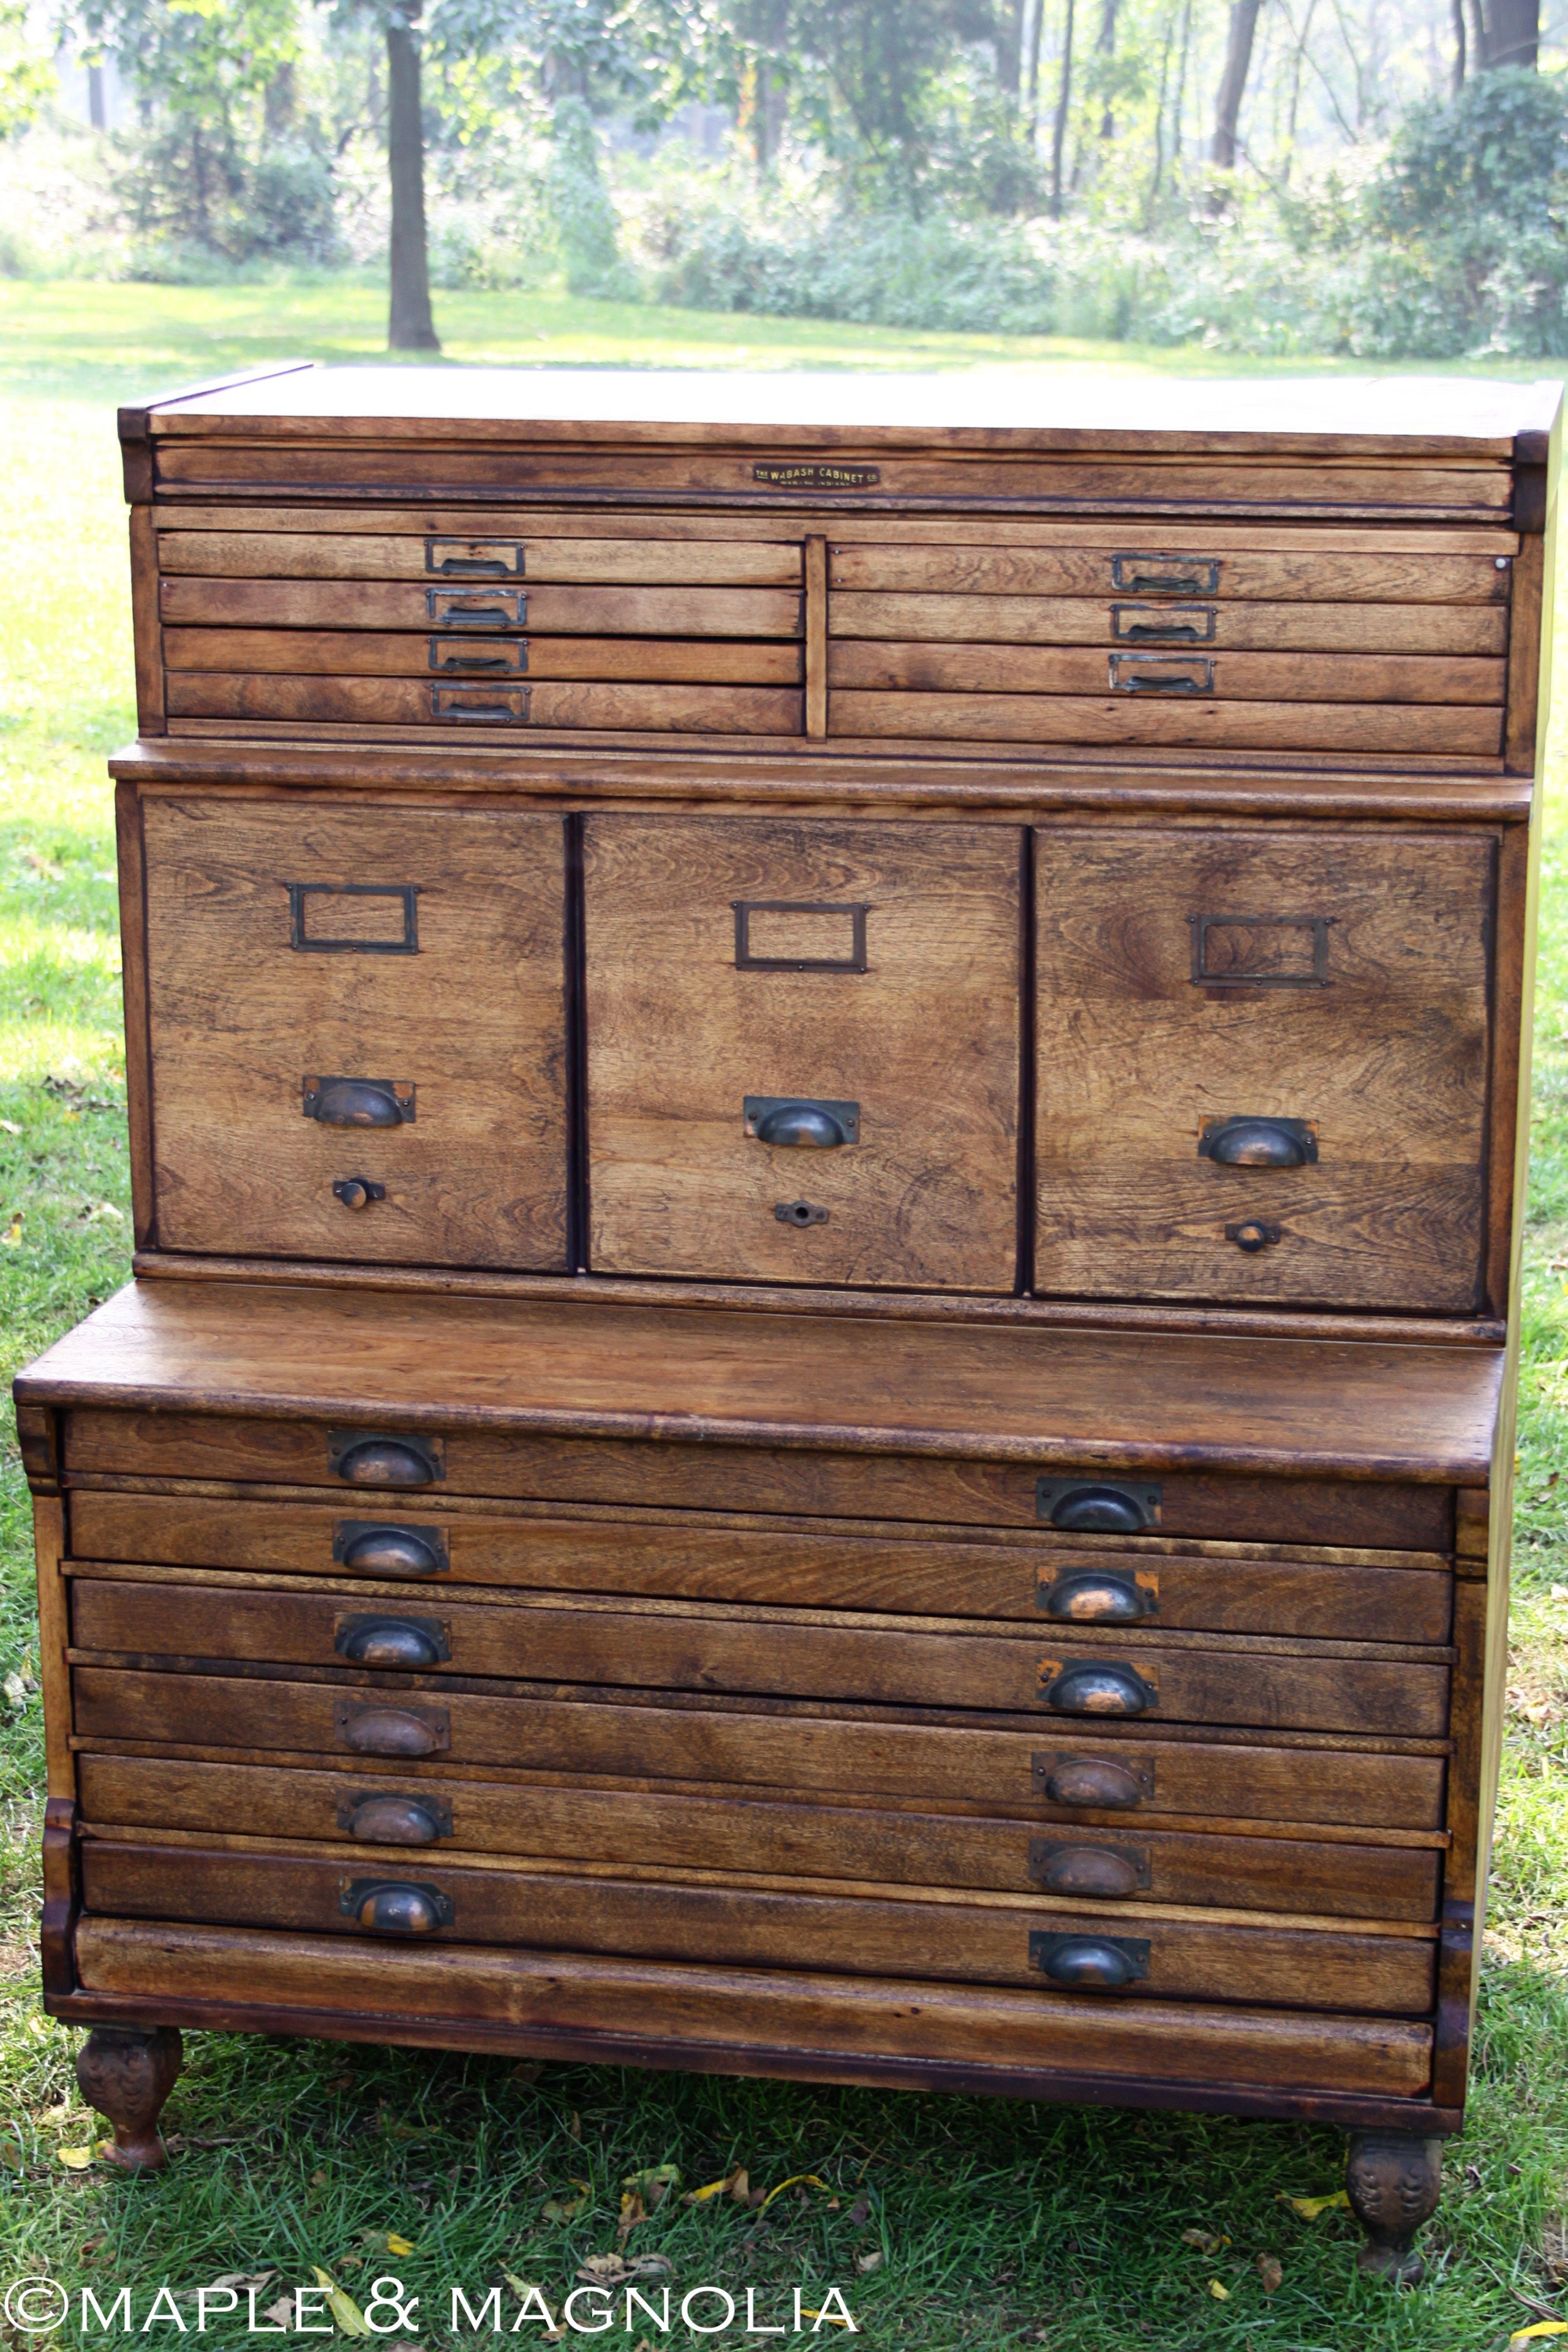 See? 11+ List About Shallow Drawer Dresser  Your Friends Forgot to Let You in!